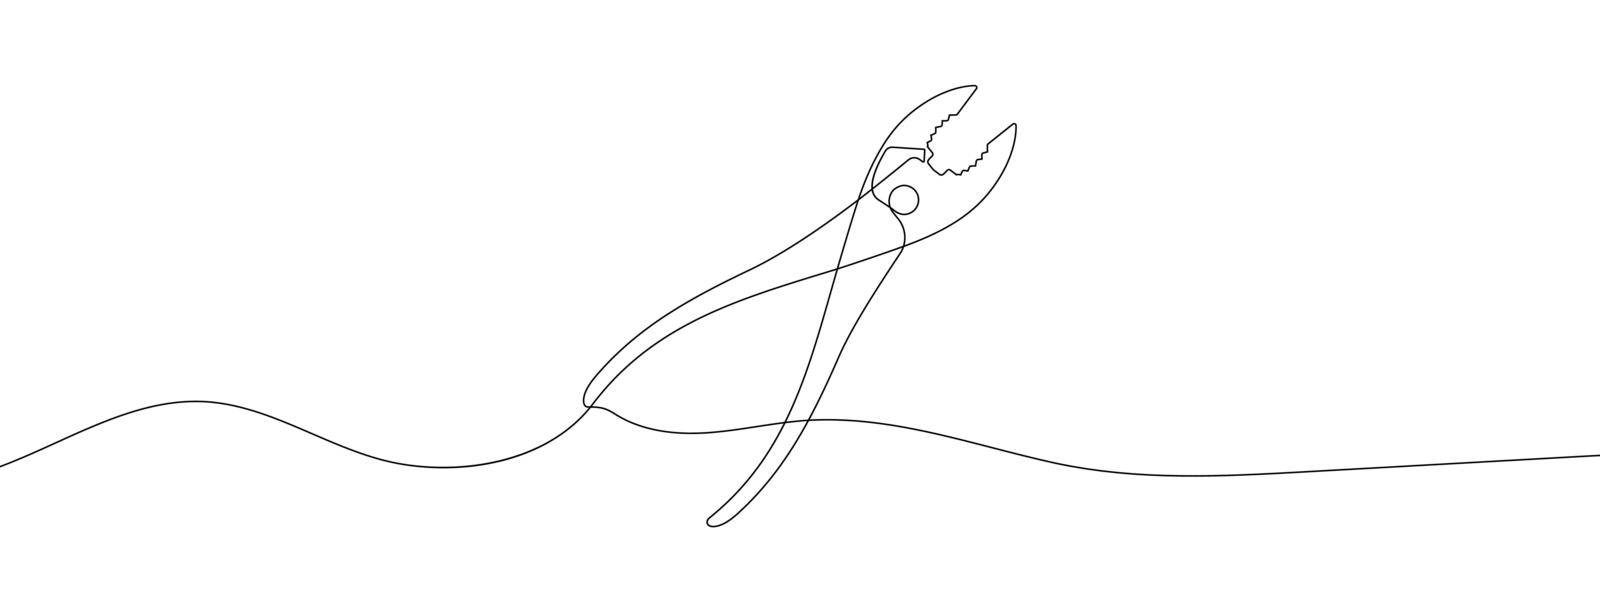 Continuous line drawing of pliers. Pliers continuous line icon. by Chekman